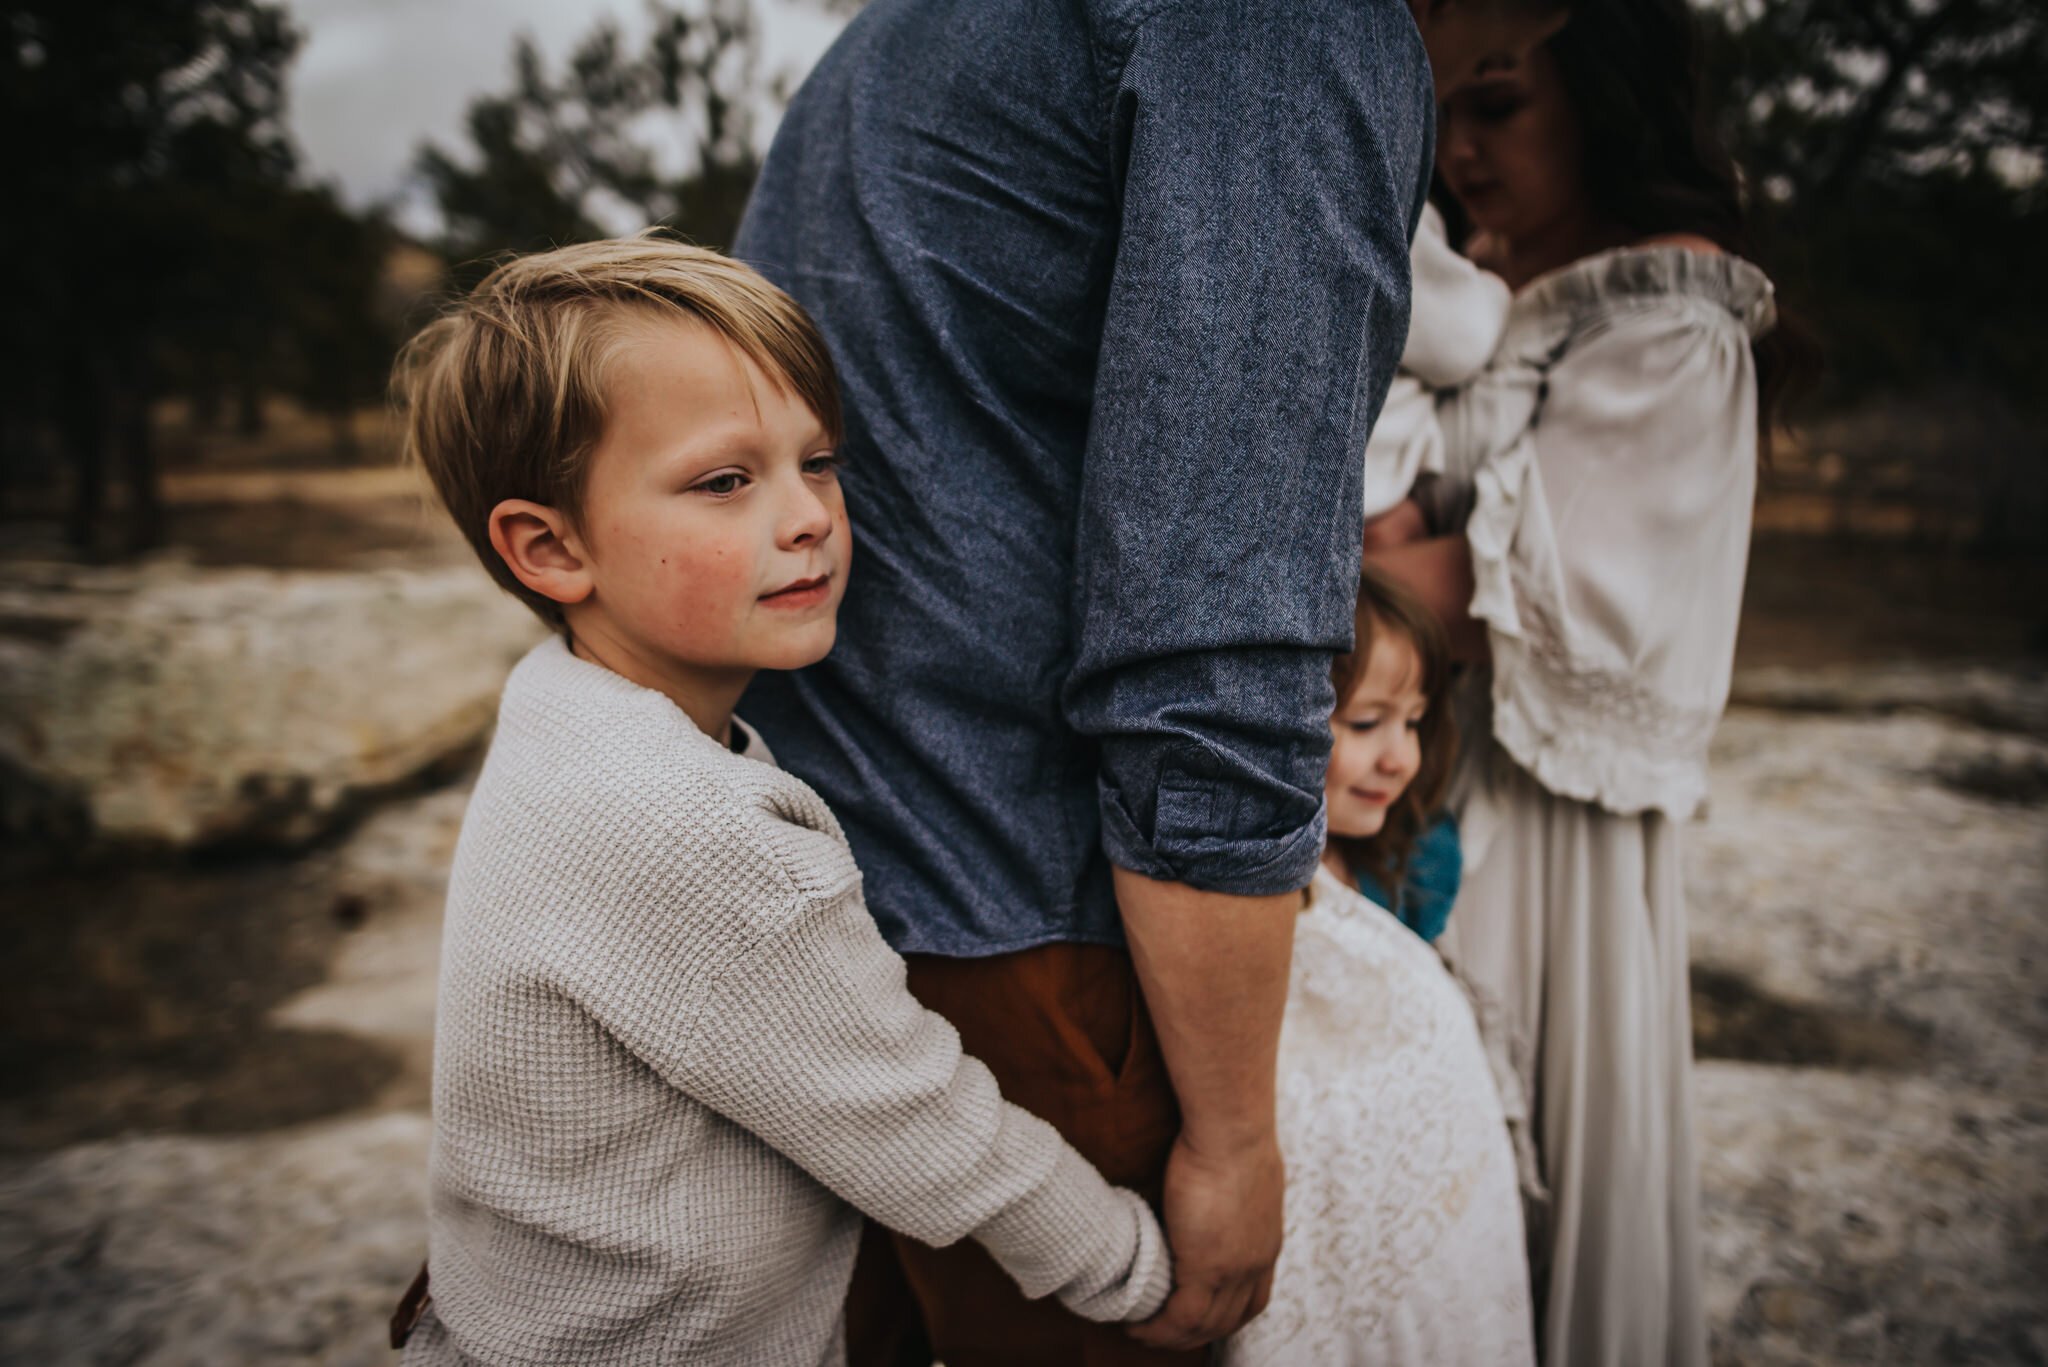 Miller+Family+Session+Mentorship+Colorado+Springs+Colorado+Sunset+Ute+Valley+Park+Mountains+Fields+Mom+Dad+Son+Daughter+Baby+Wild+Prairie+Photography-23-2020.jpeg